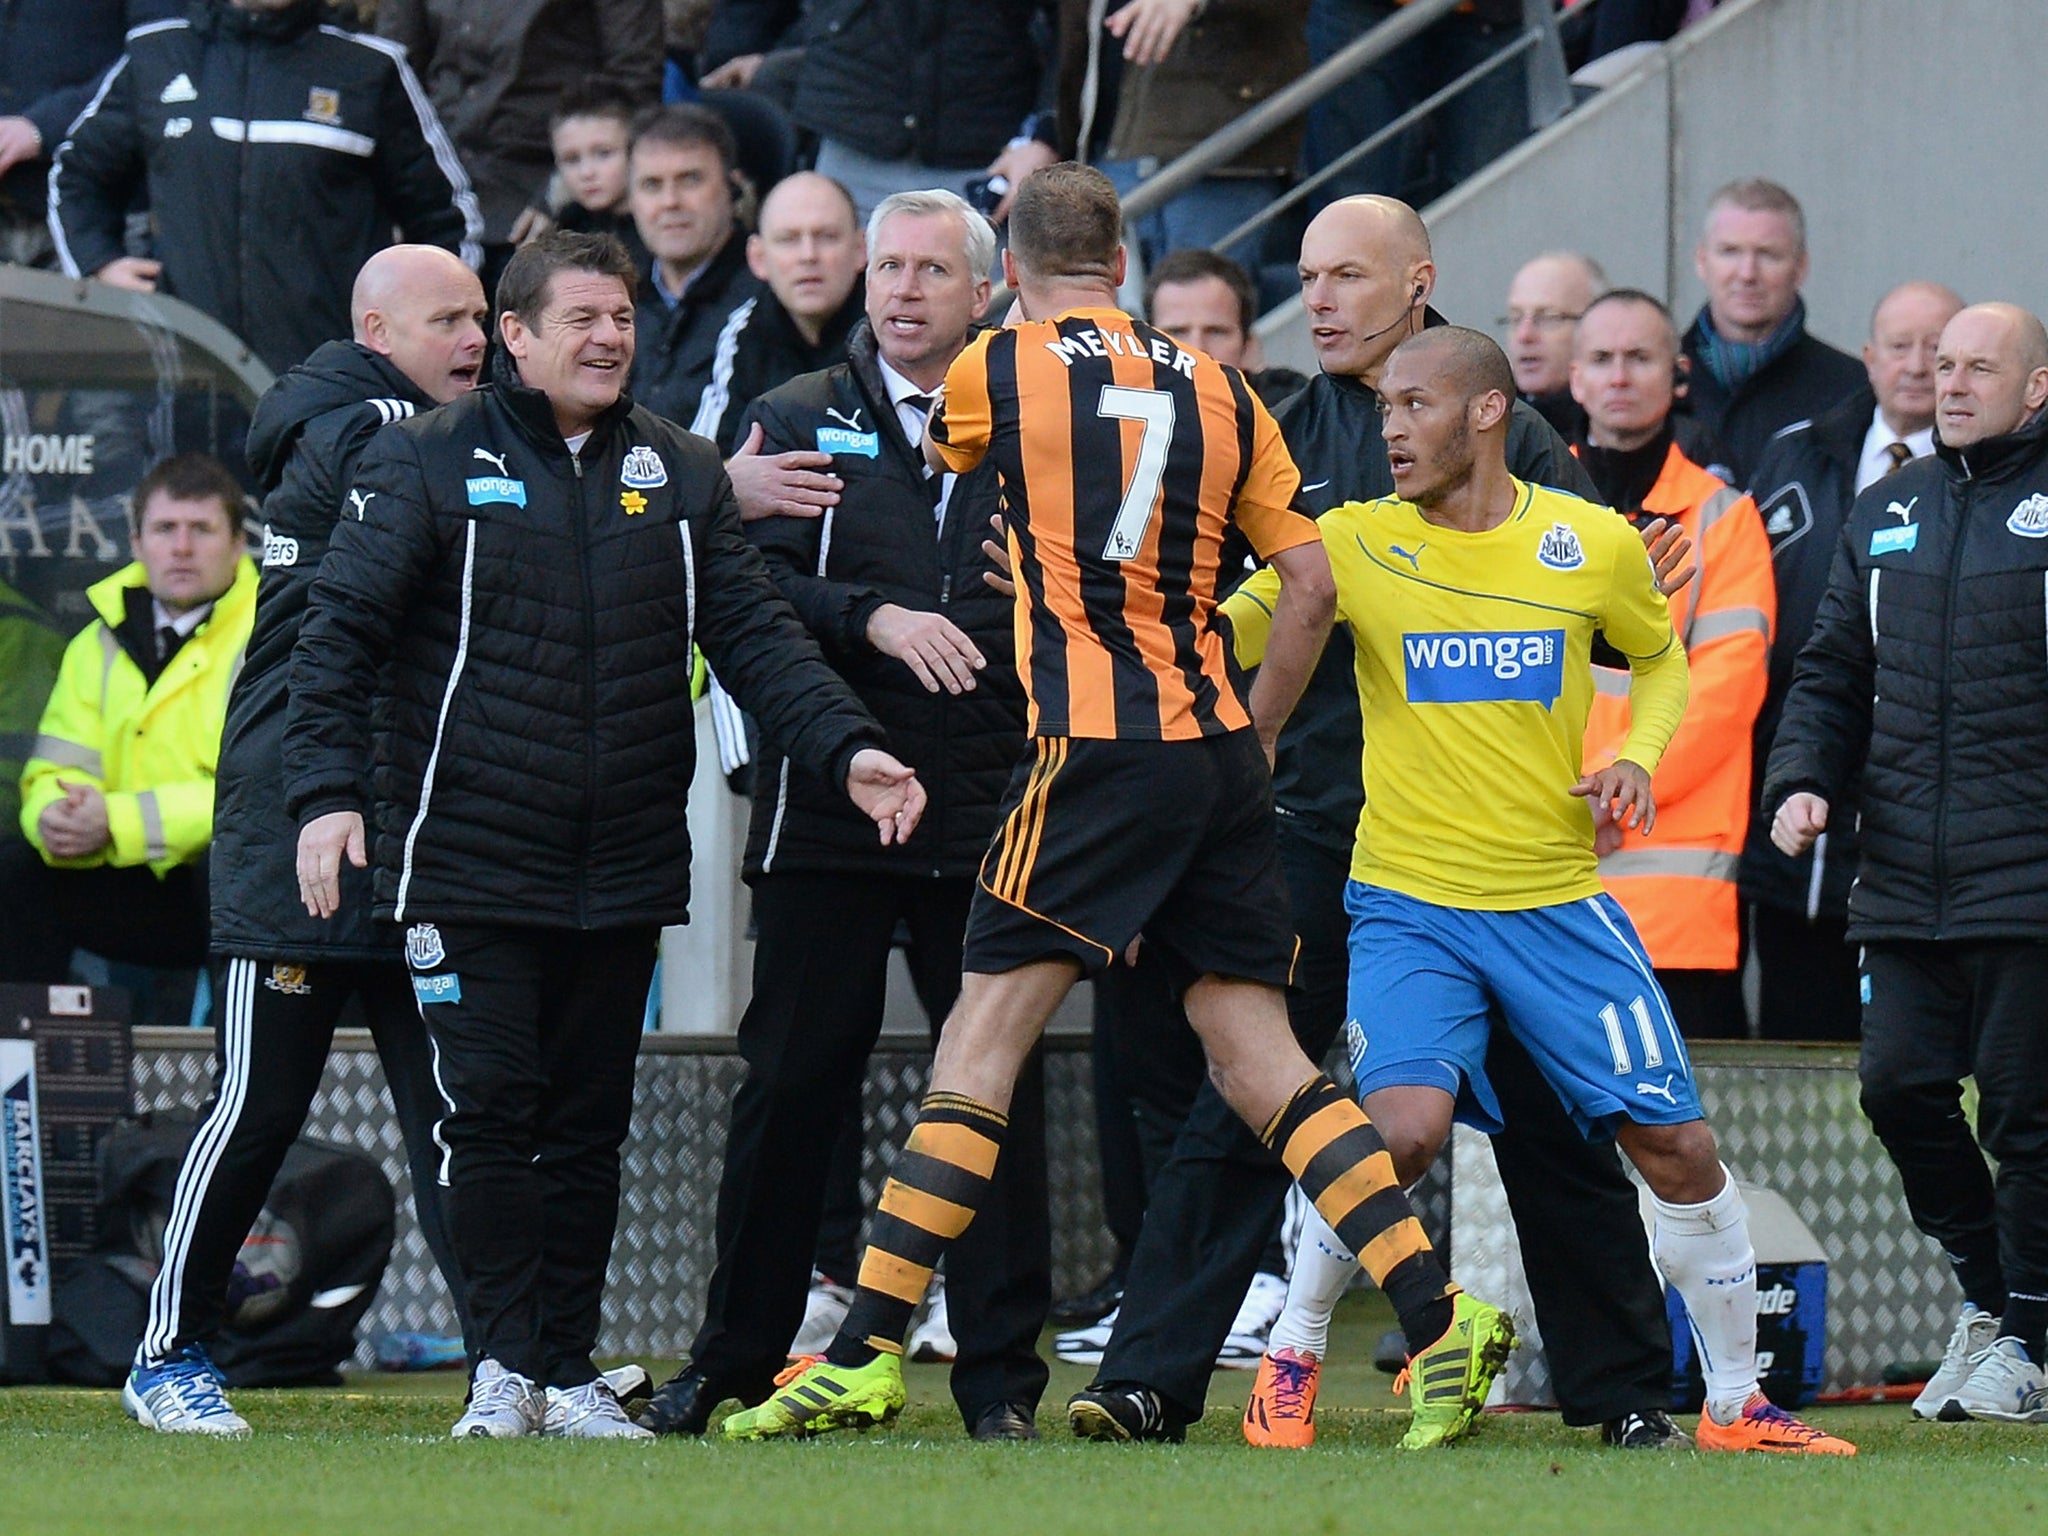 Newcastle manager Alan Pardew was sent to the stands for clashing with Hull midfielder David Meyler